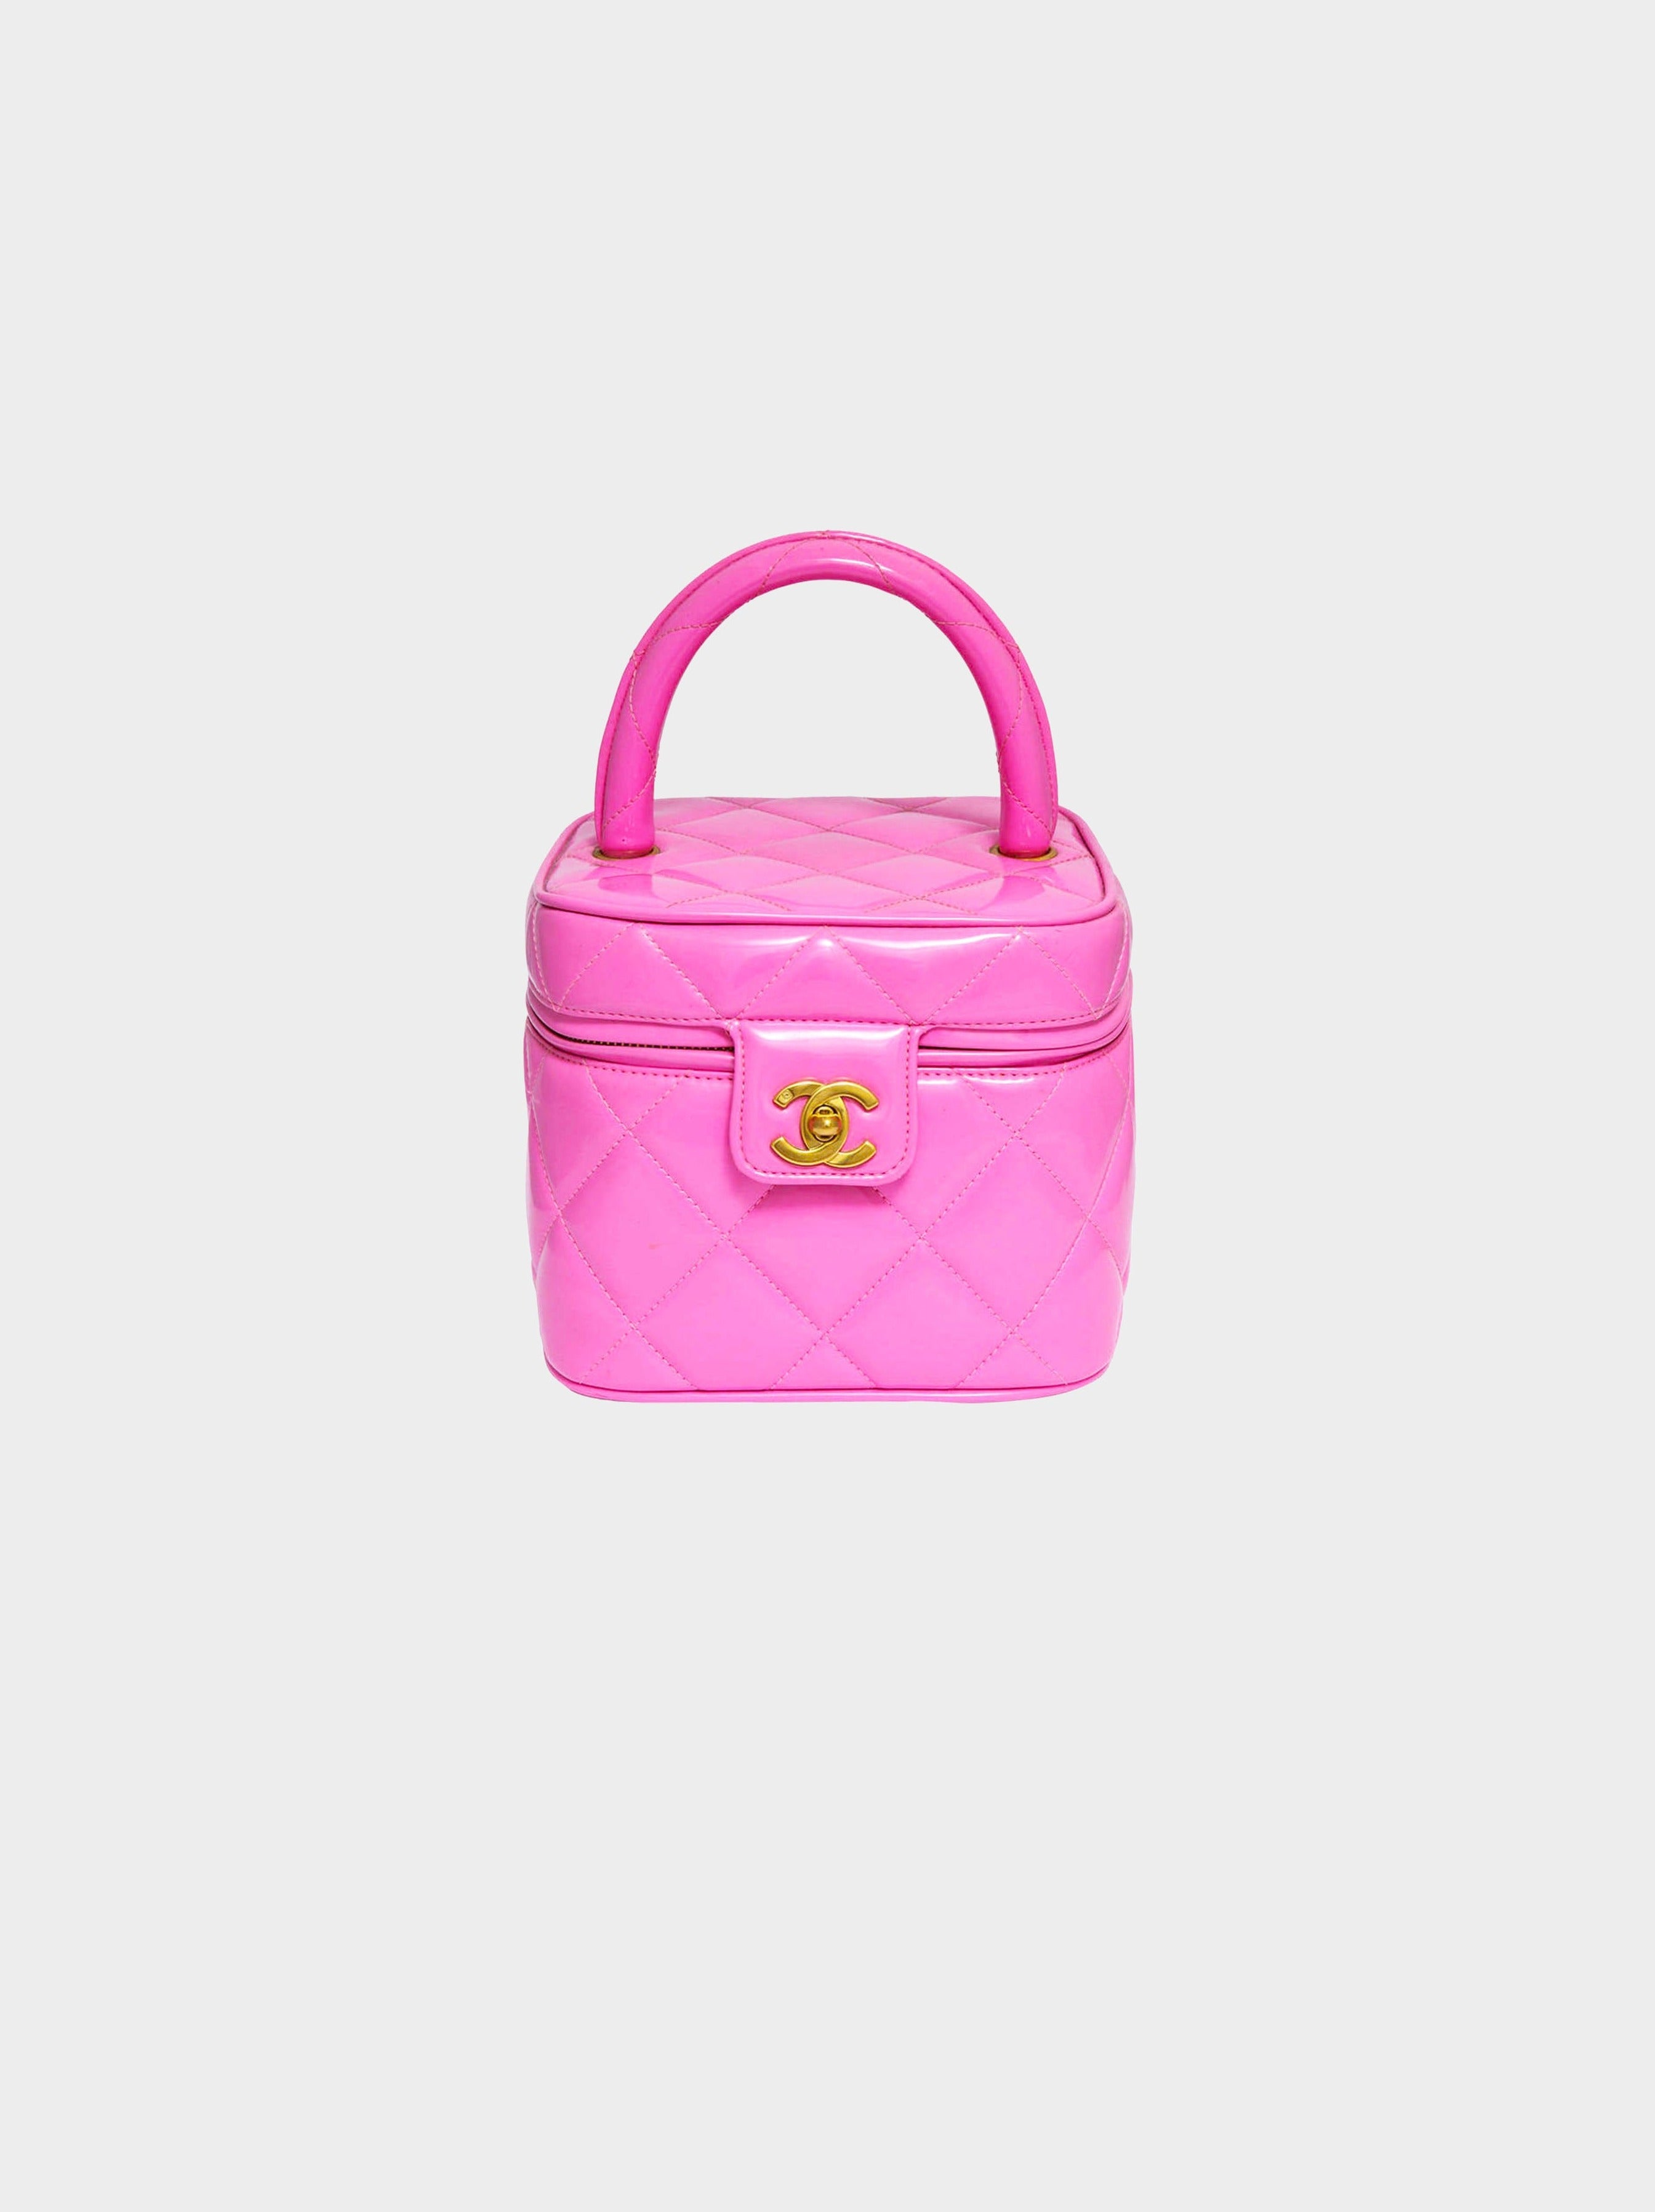 Chanel Heart Bag Pink (Large) Chanel - Shop for the best selection